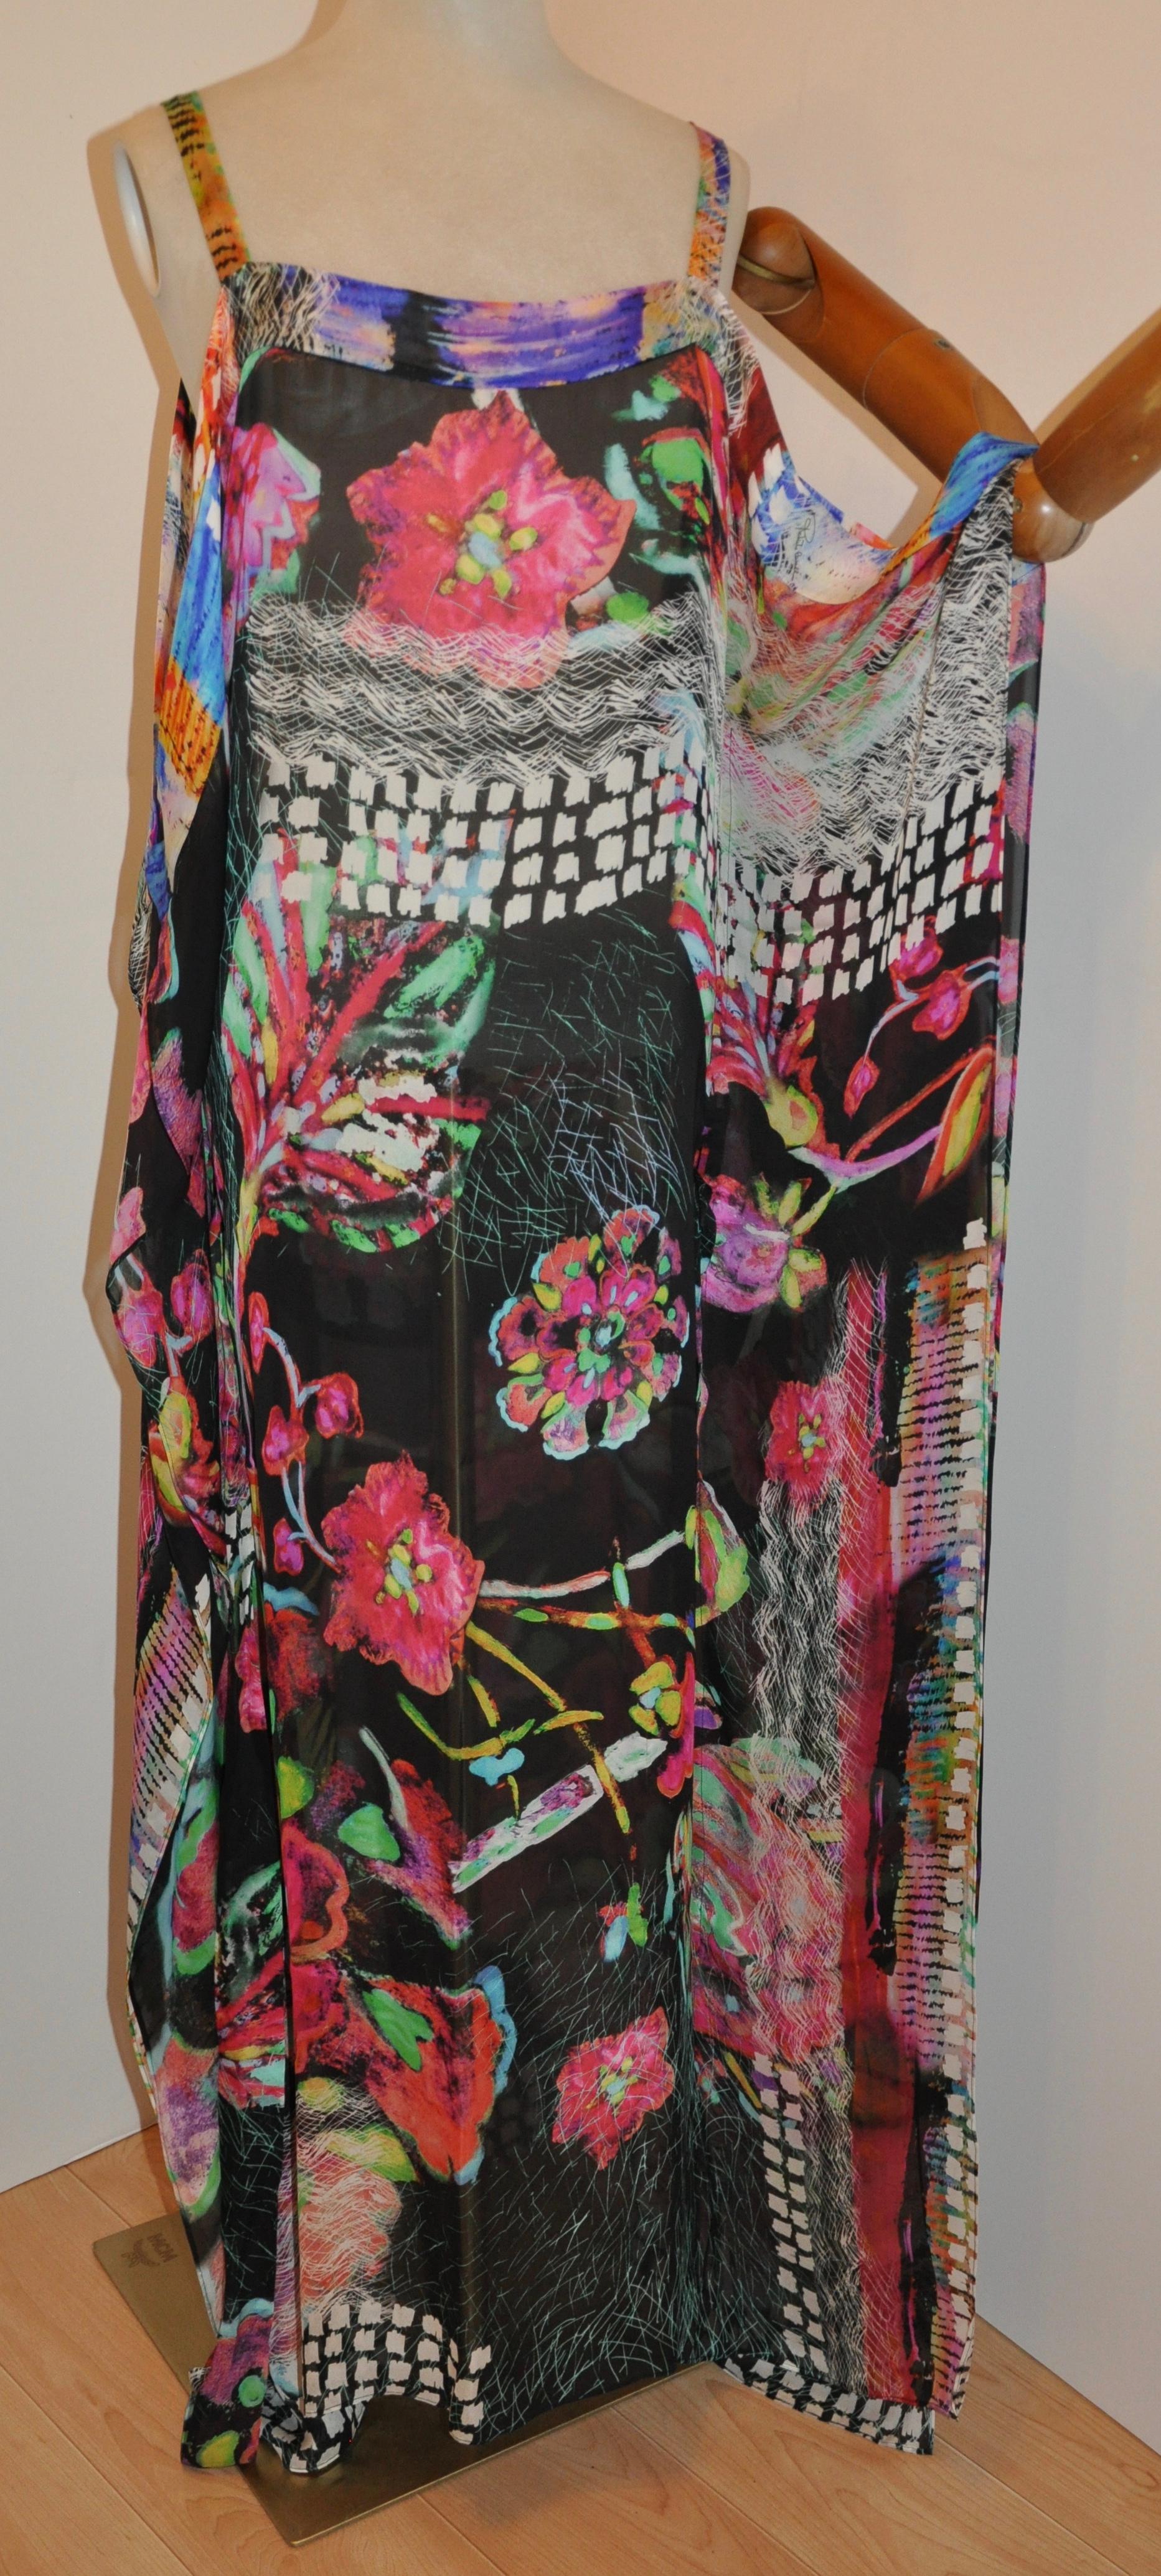        Roberto Cavalli wonderfully glorious flowing multicolor floral caftan-like maxi coverup has an optional self-tie if desire. The belt measures 68 inches in length. Thee total length measures 54 1/2 inches, width measures 76 inches in